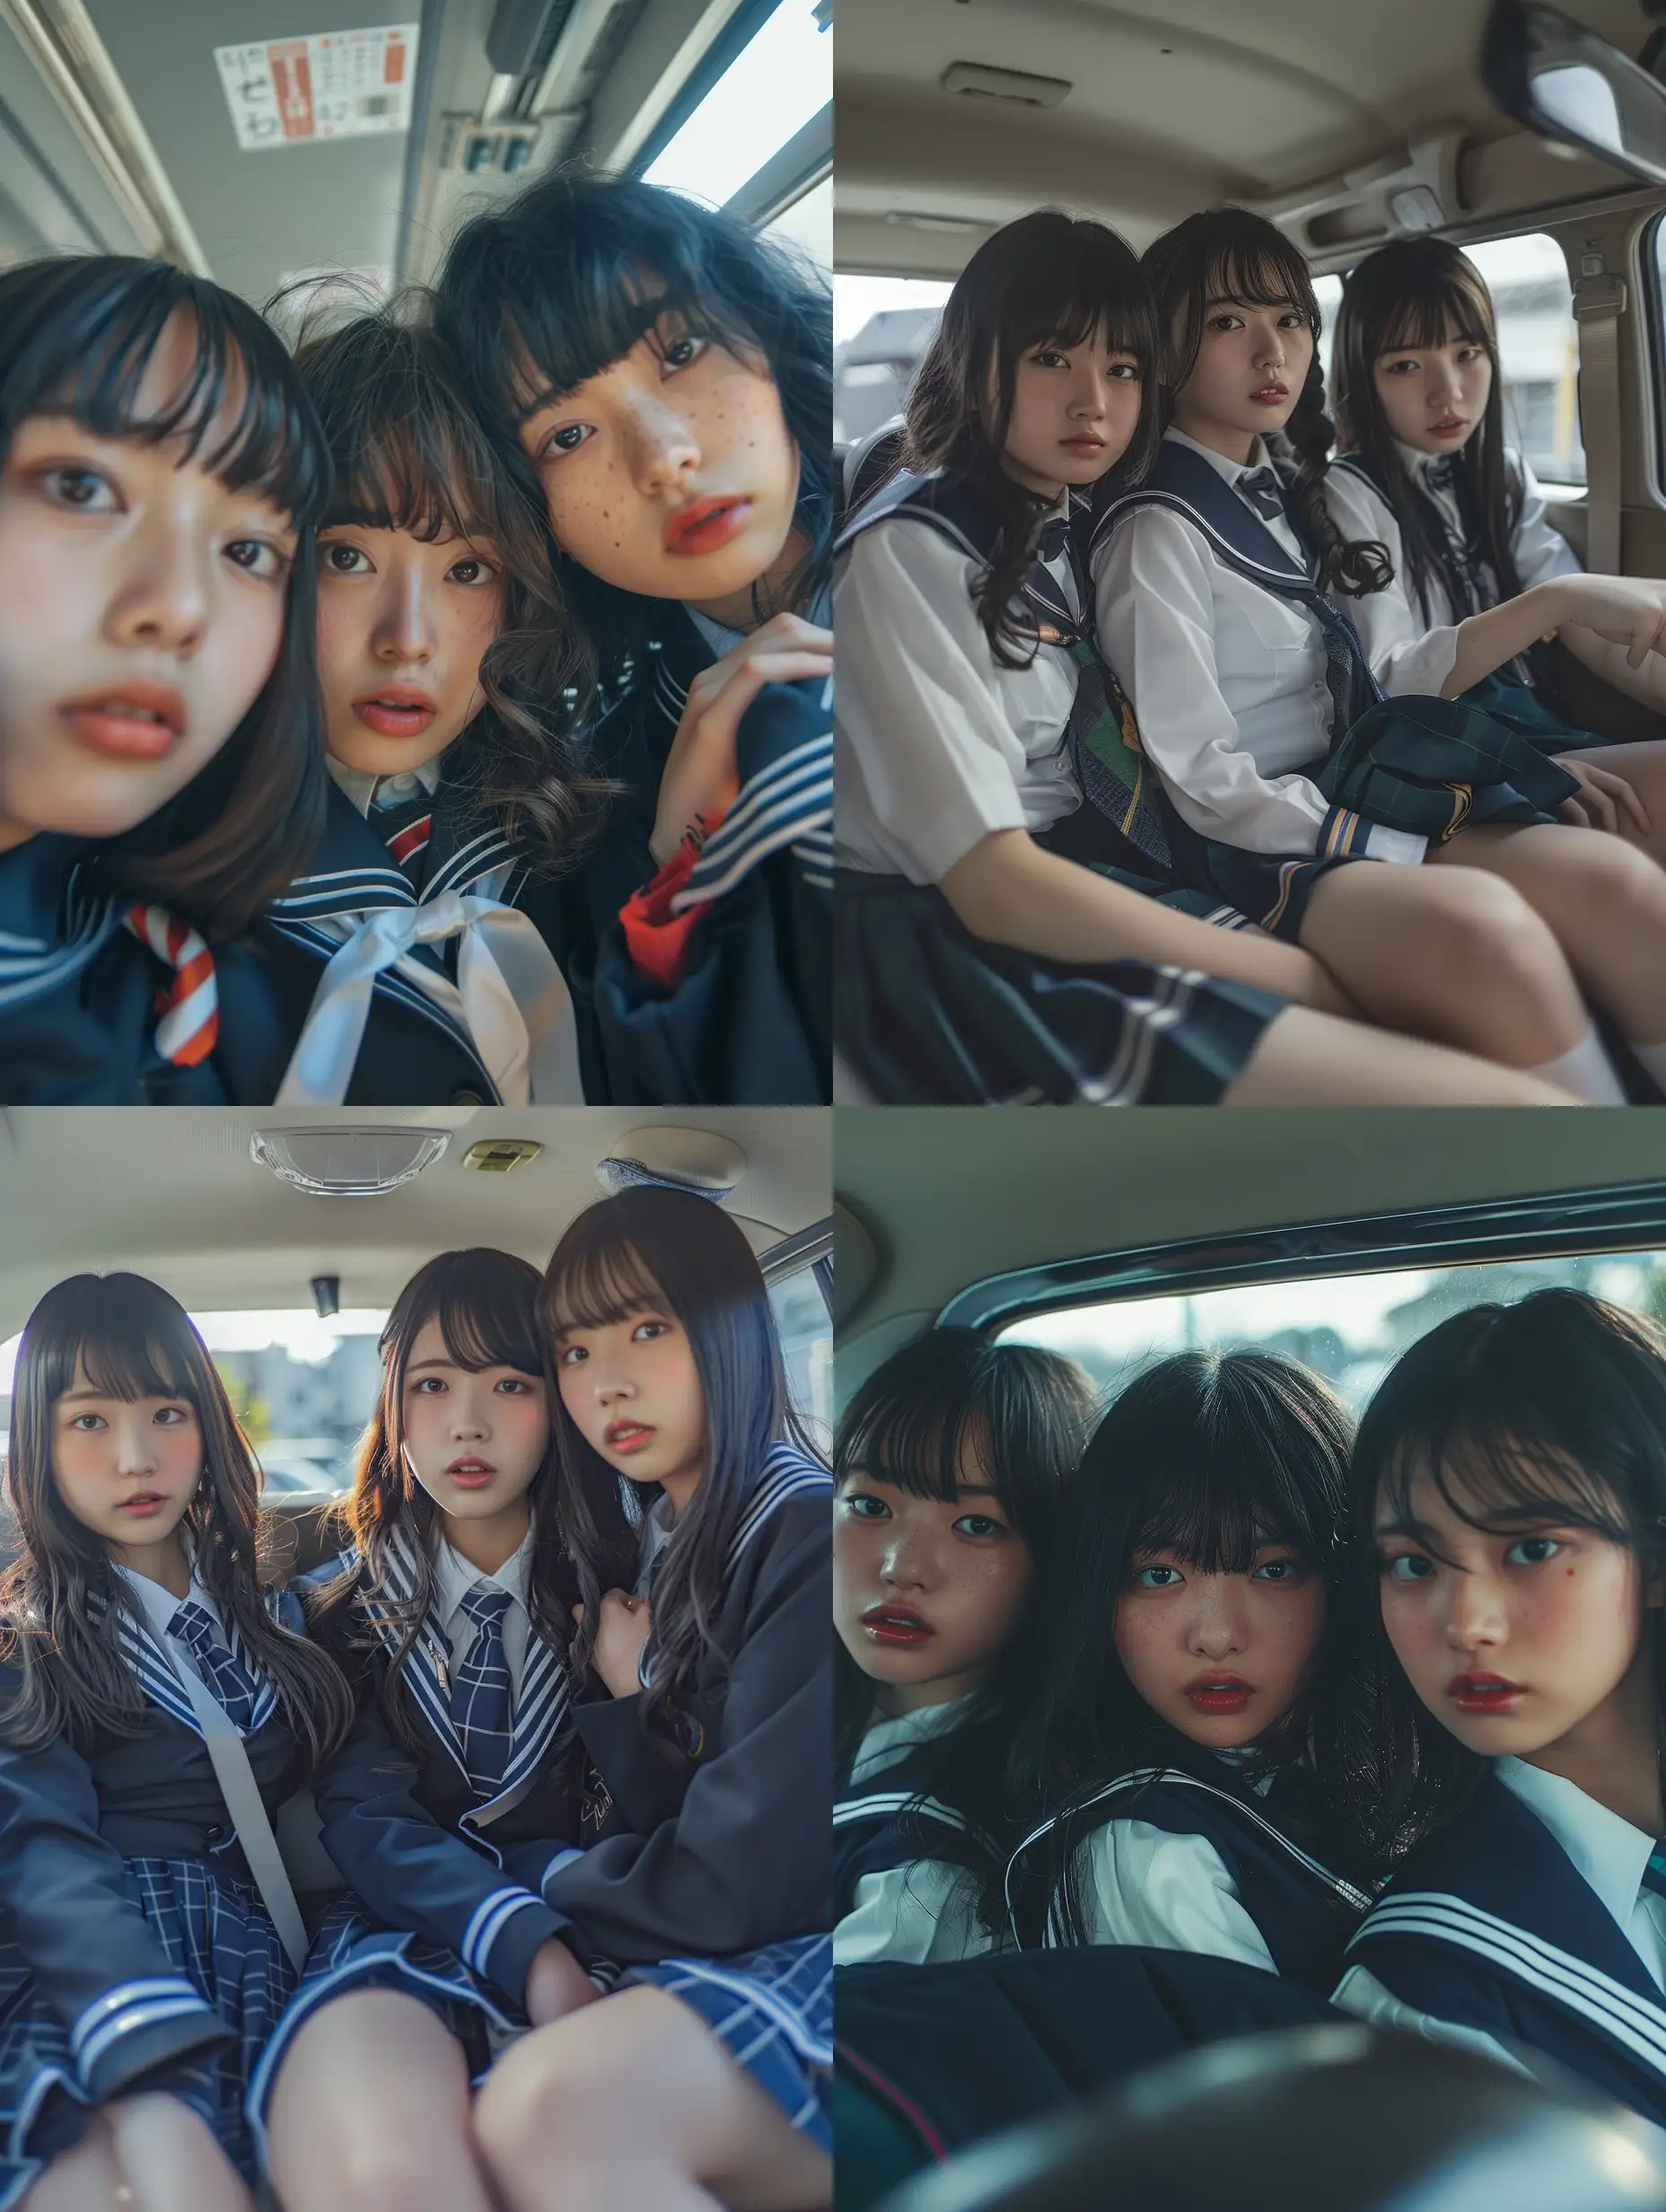 Three-Japanese-Girls-in-School-Uniforms-Posing-Inside-Car-with-Natural-Photography-Style